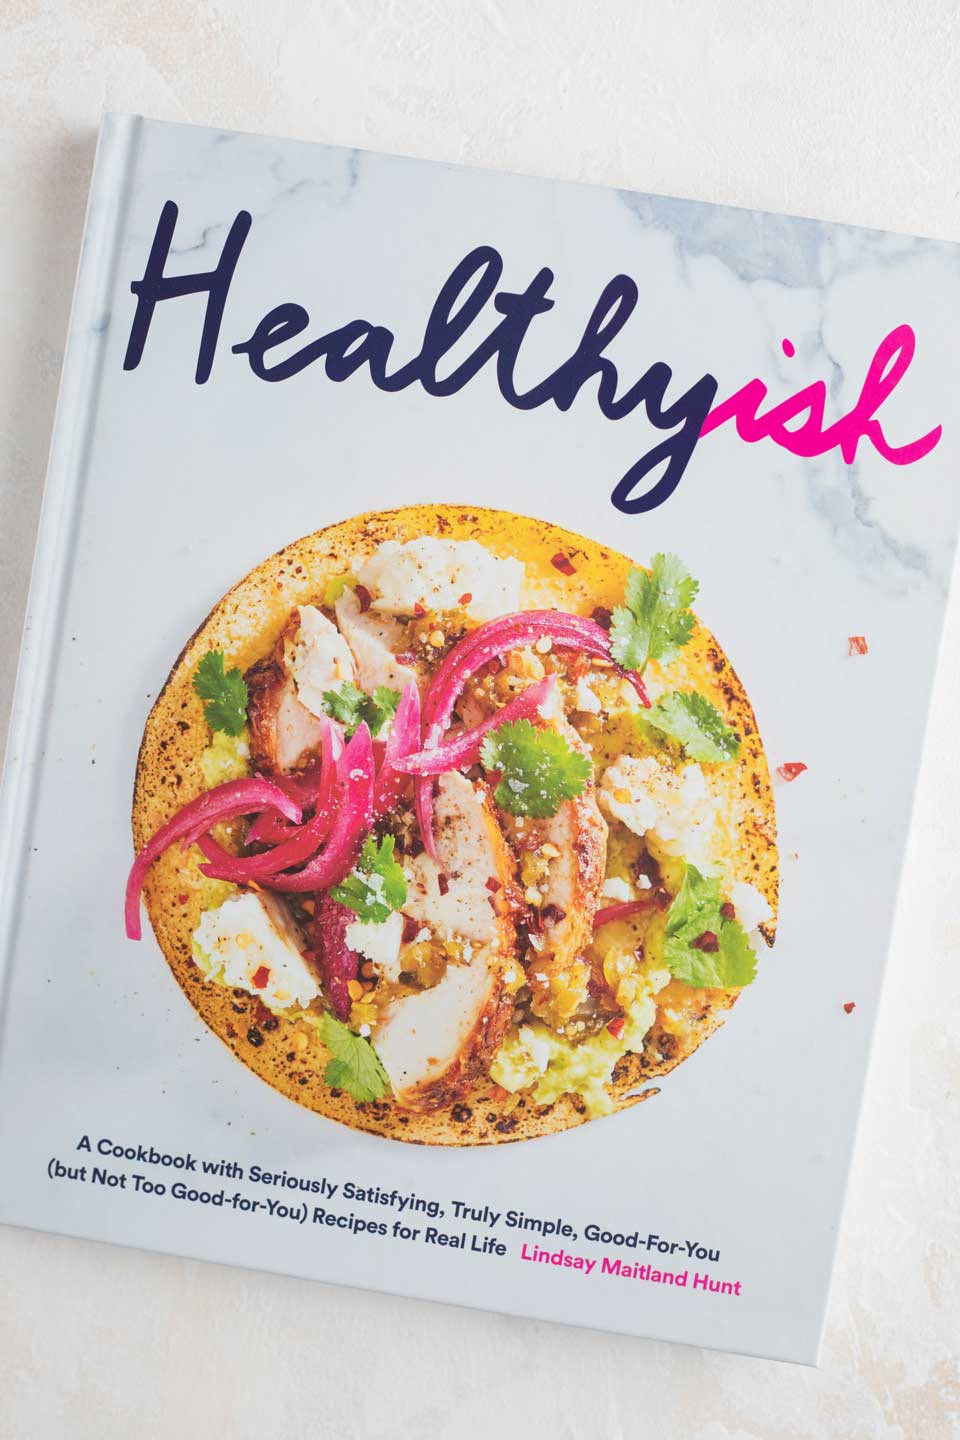 The new cookbook Healthyish by Lindsay Maitland Hunt is full of healthier (yet hugely flavorful!) recipes, like the One-Pot Pasta with Asparagus, Peas and Parmesan we’re featuring on the blog today!